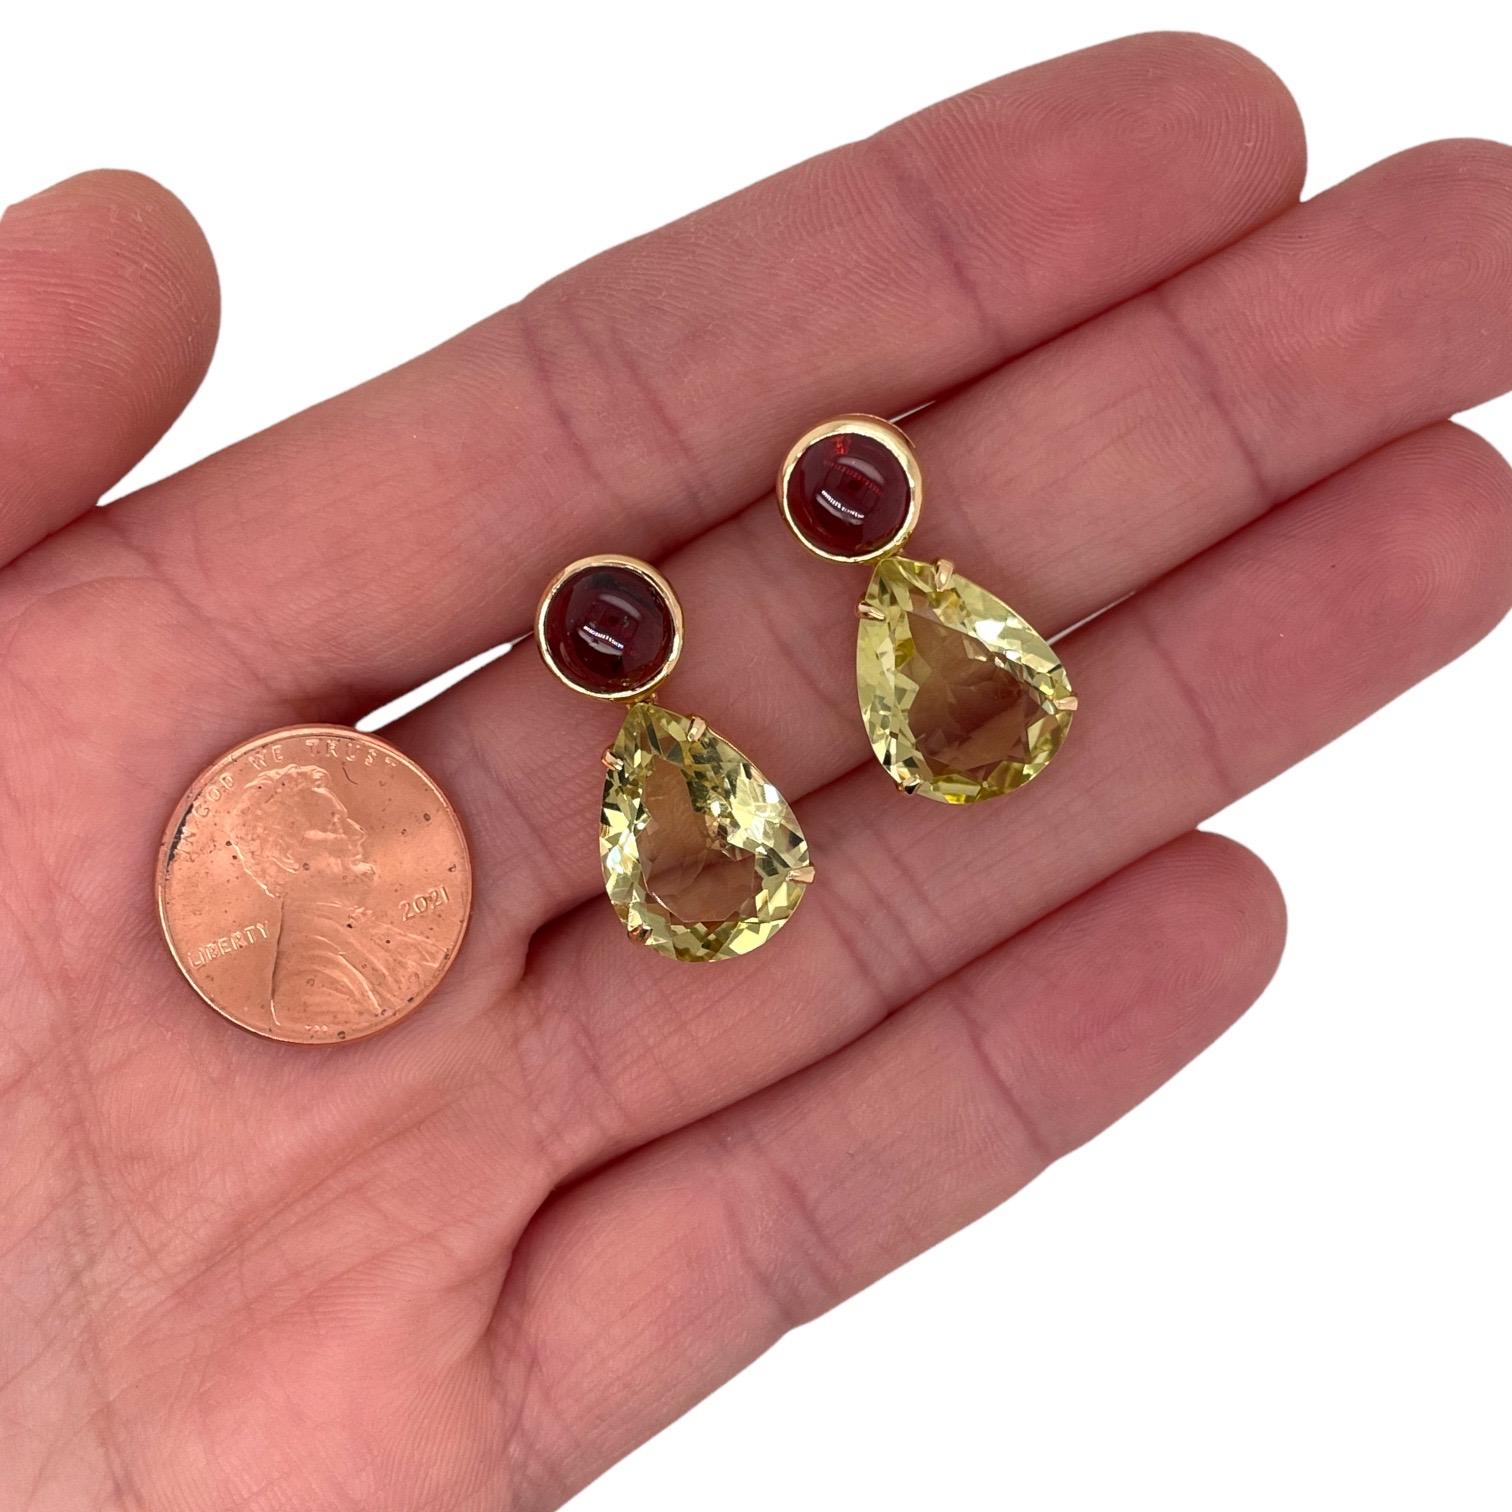 Earring contain 2 finely matched pear shape lemon quartz, 12x15mm and 2 round cabochon garnets, 7mm weighing a total of approximately 7.50cts Stones are mounted in 18k yellow gold prong and bezel settings weighing a total of 6.43grams. Earring